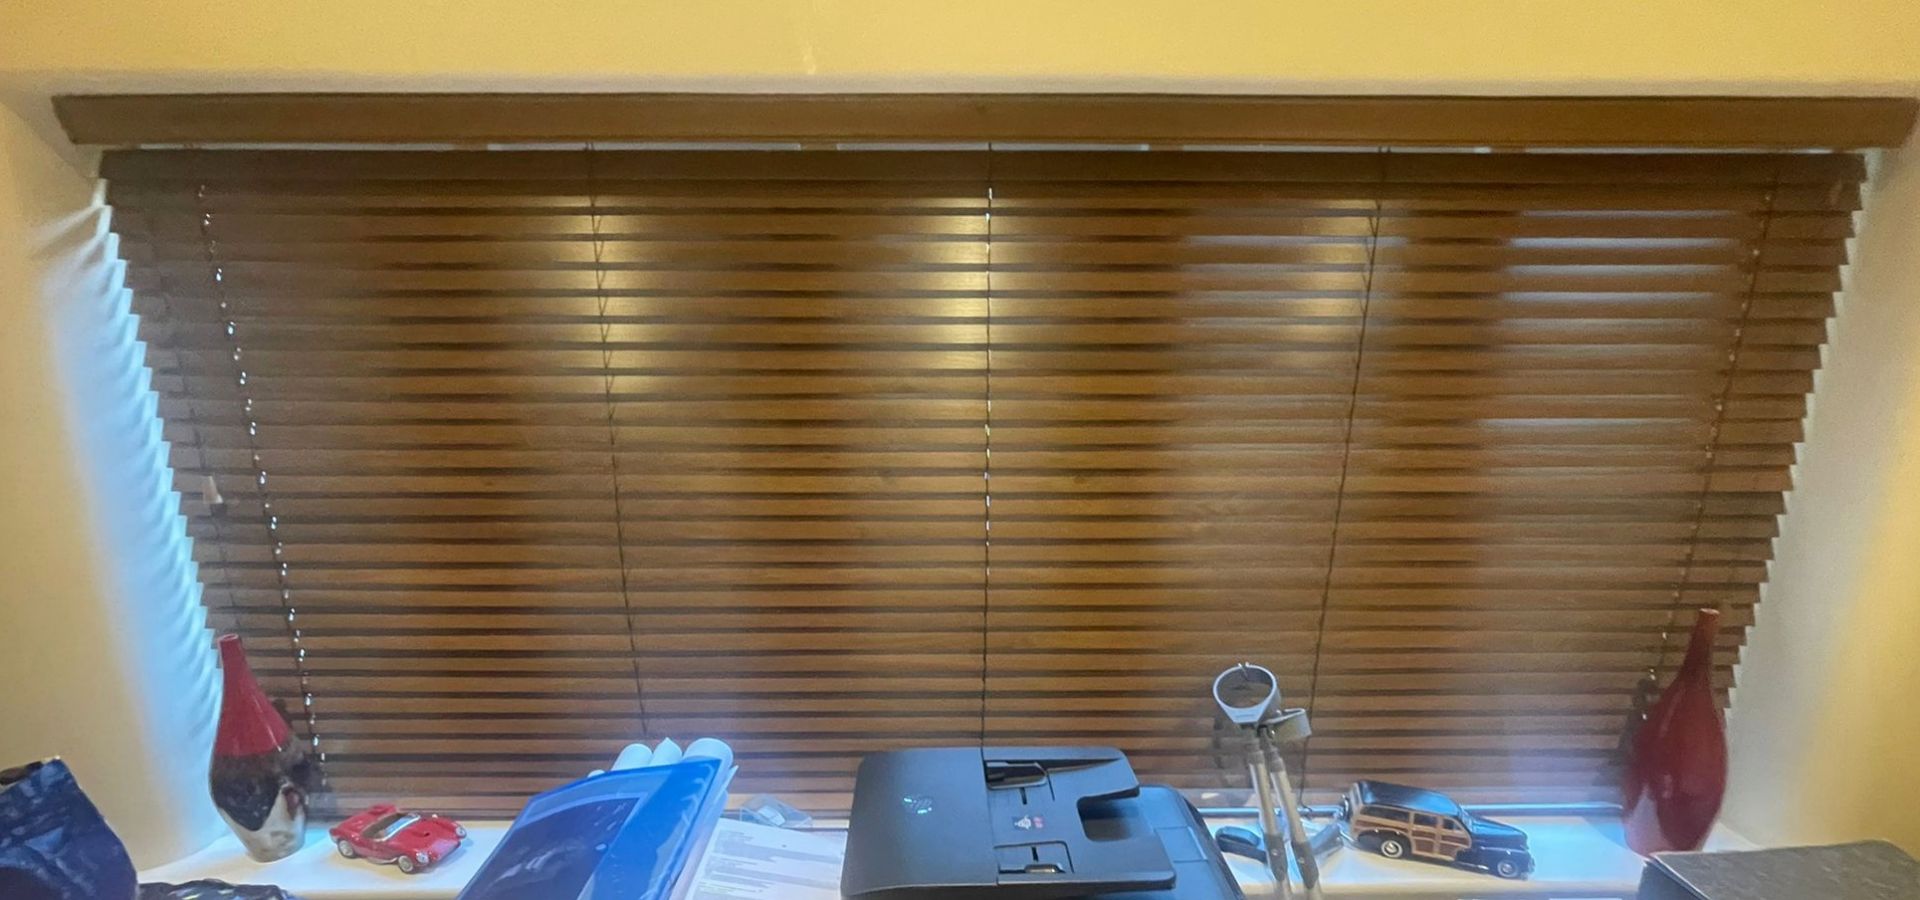 1 x Set Of Wooden Slatted Blinds - Dimensions: 126(h) x 280(w) cm - Exclusive Property In Hale Barns - Image 3 of 4